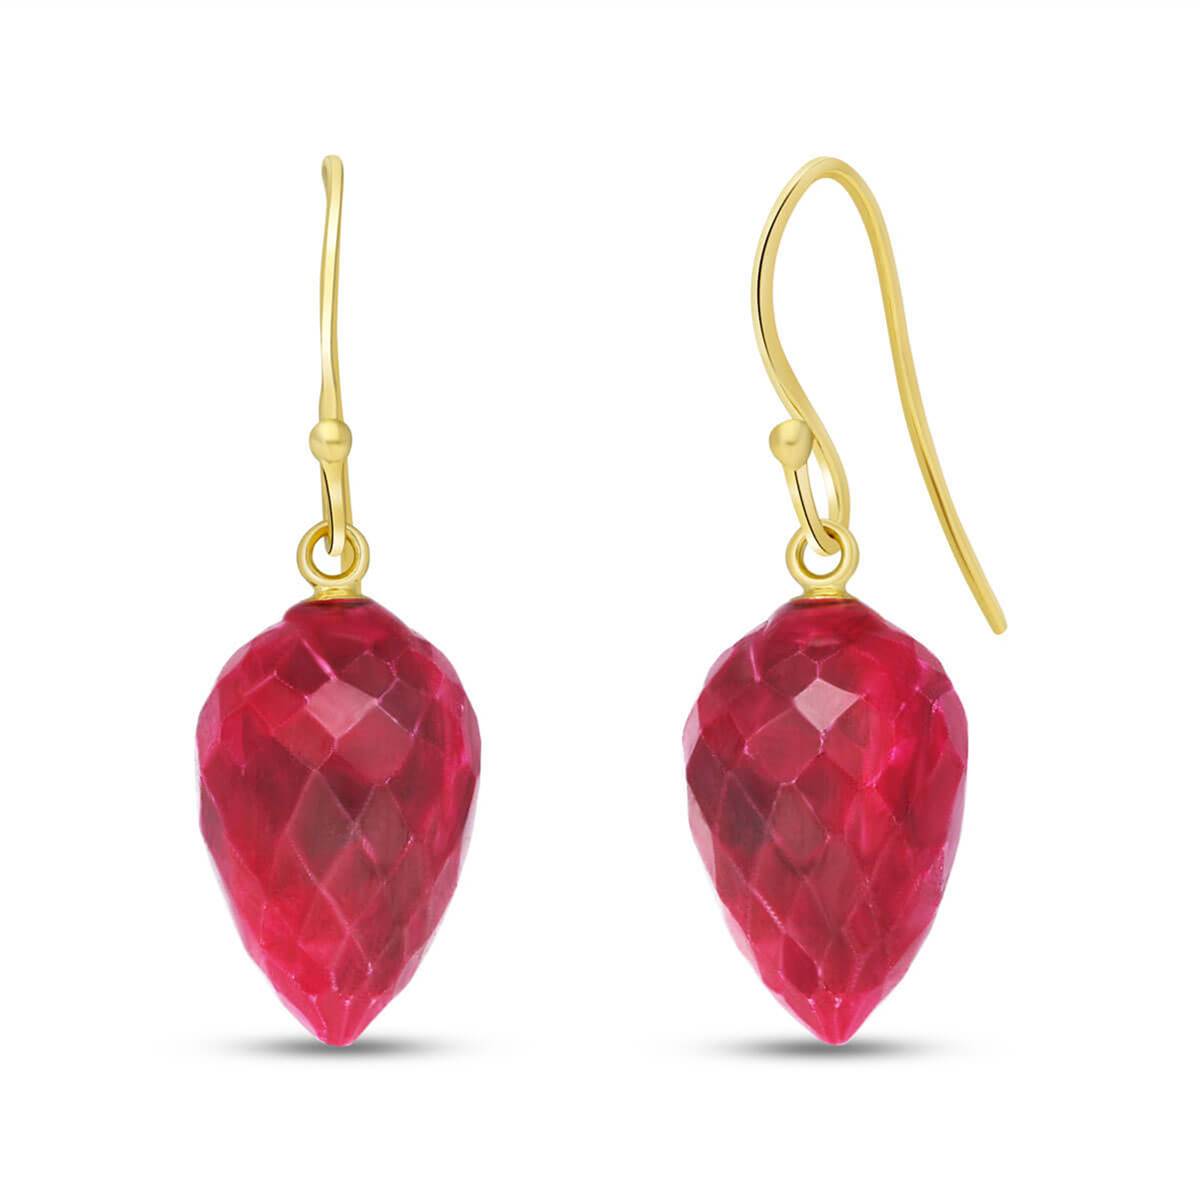 26.1 Carat 14K Solid Yellow Gold Rosanna Ruby Earrings